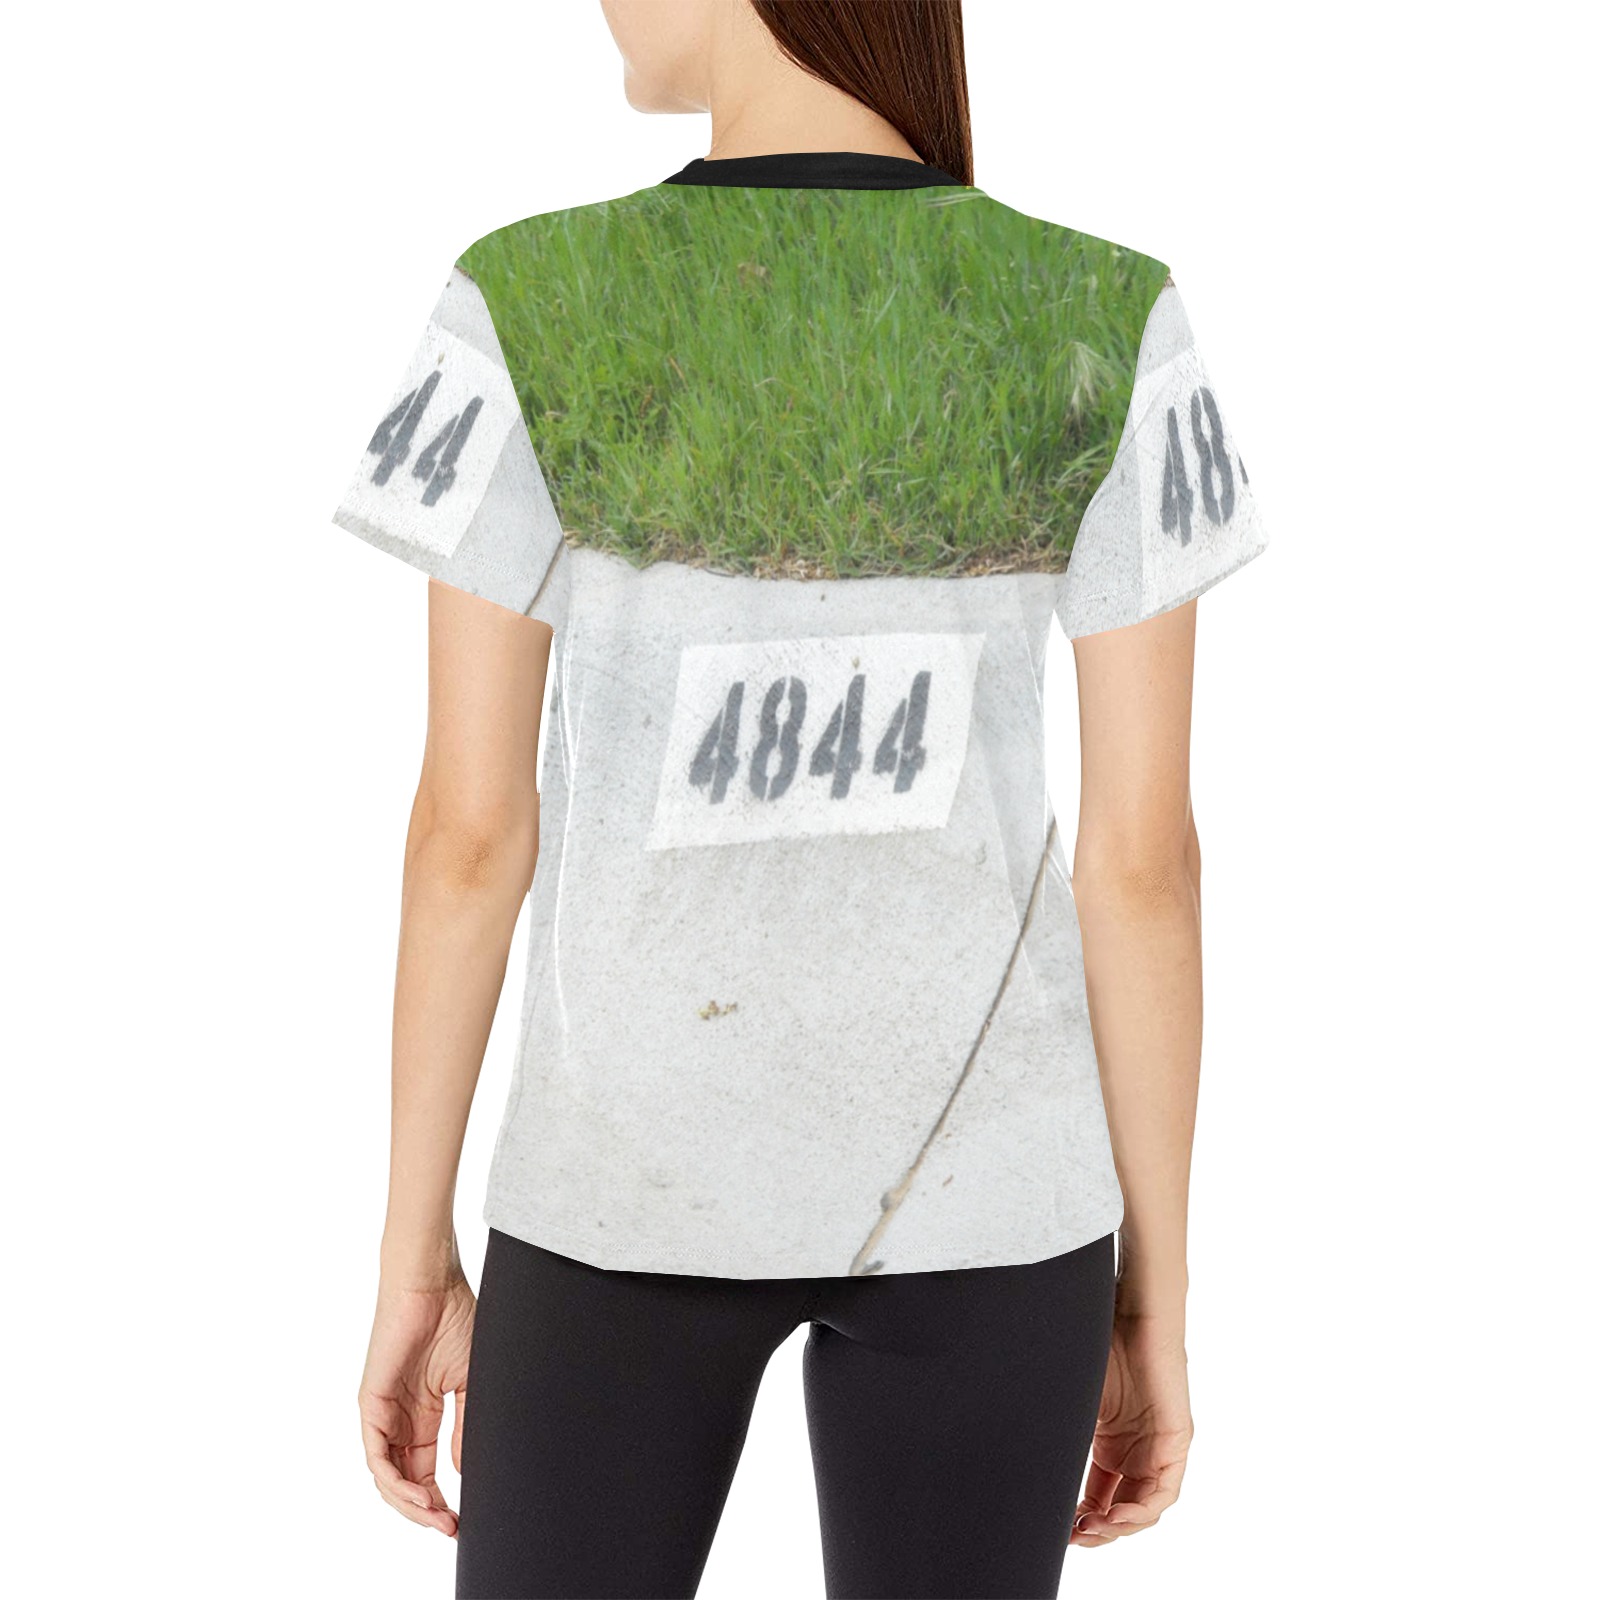 Street Number 4844 with black collar Women's All Over Print Crew Neck T-Shirt (Model T40-2)